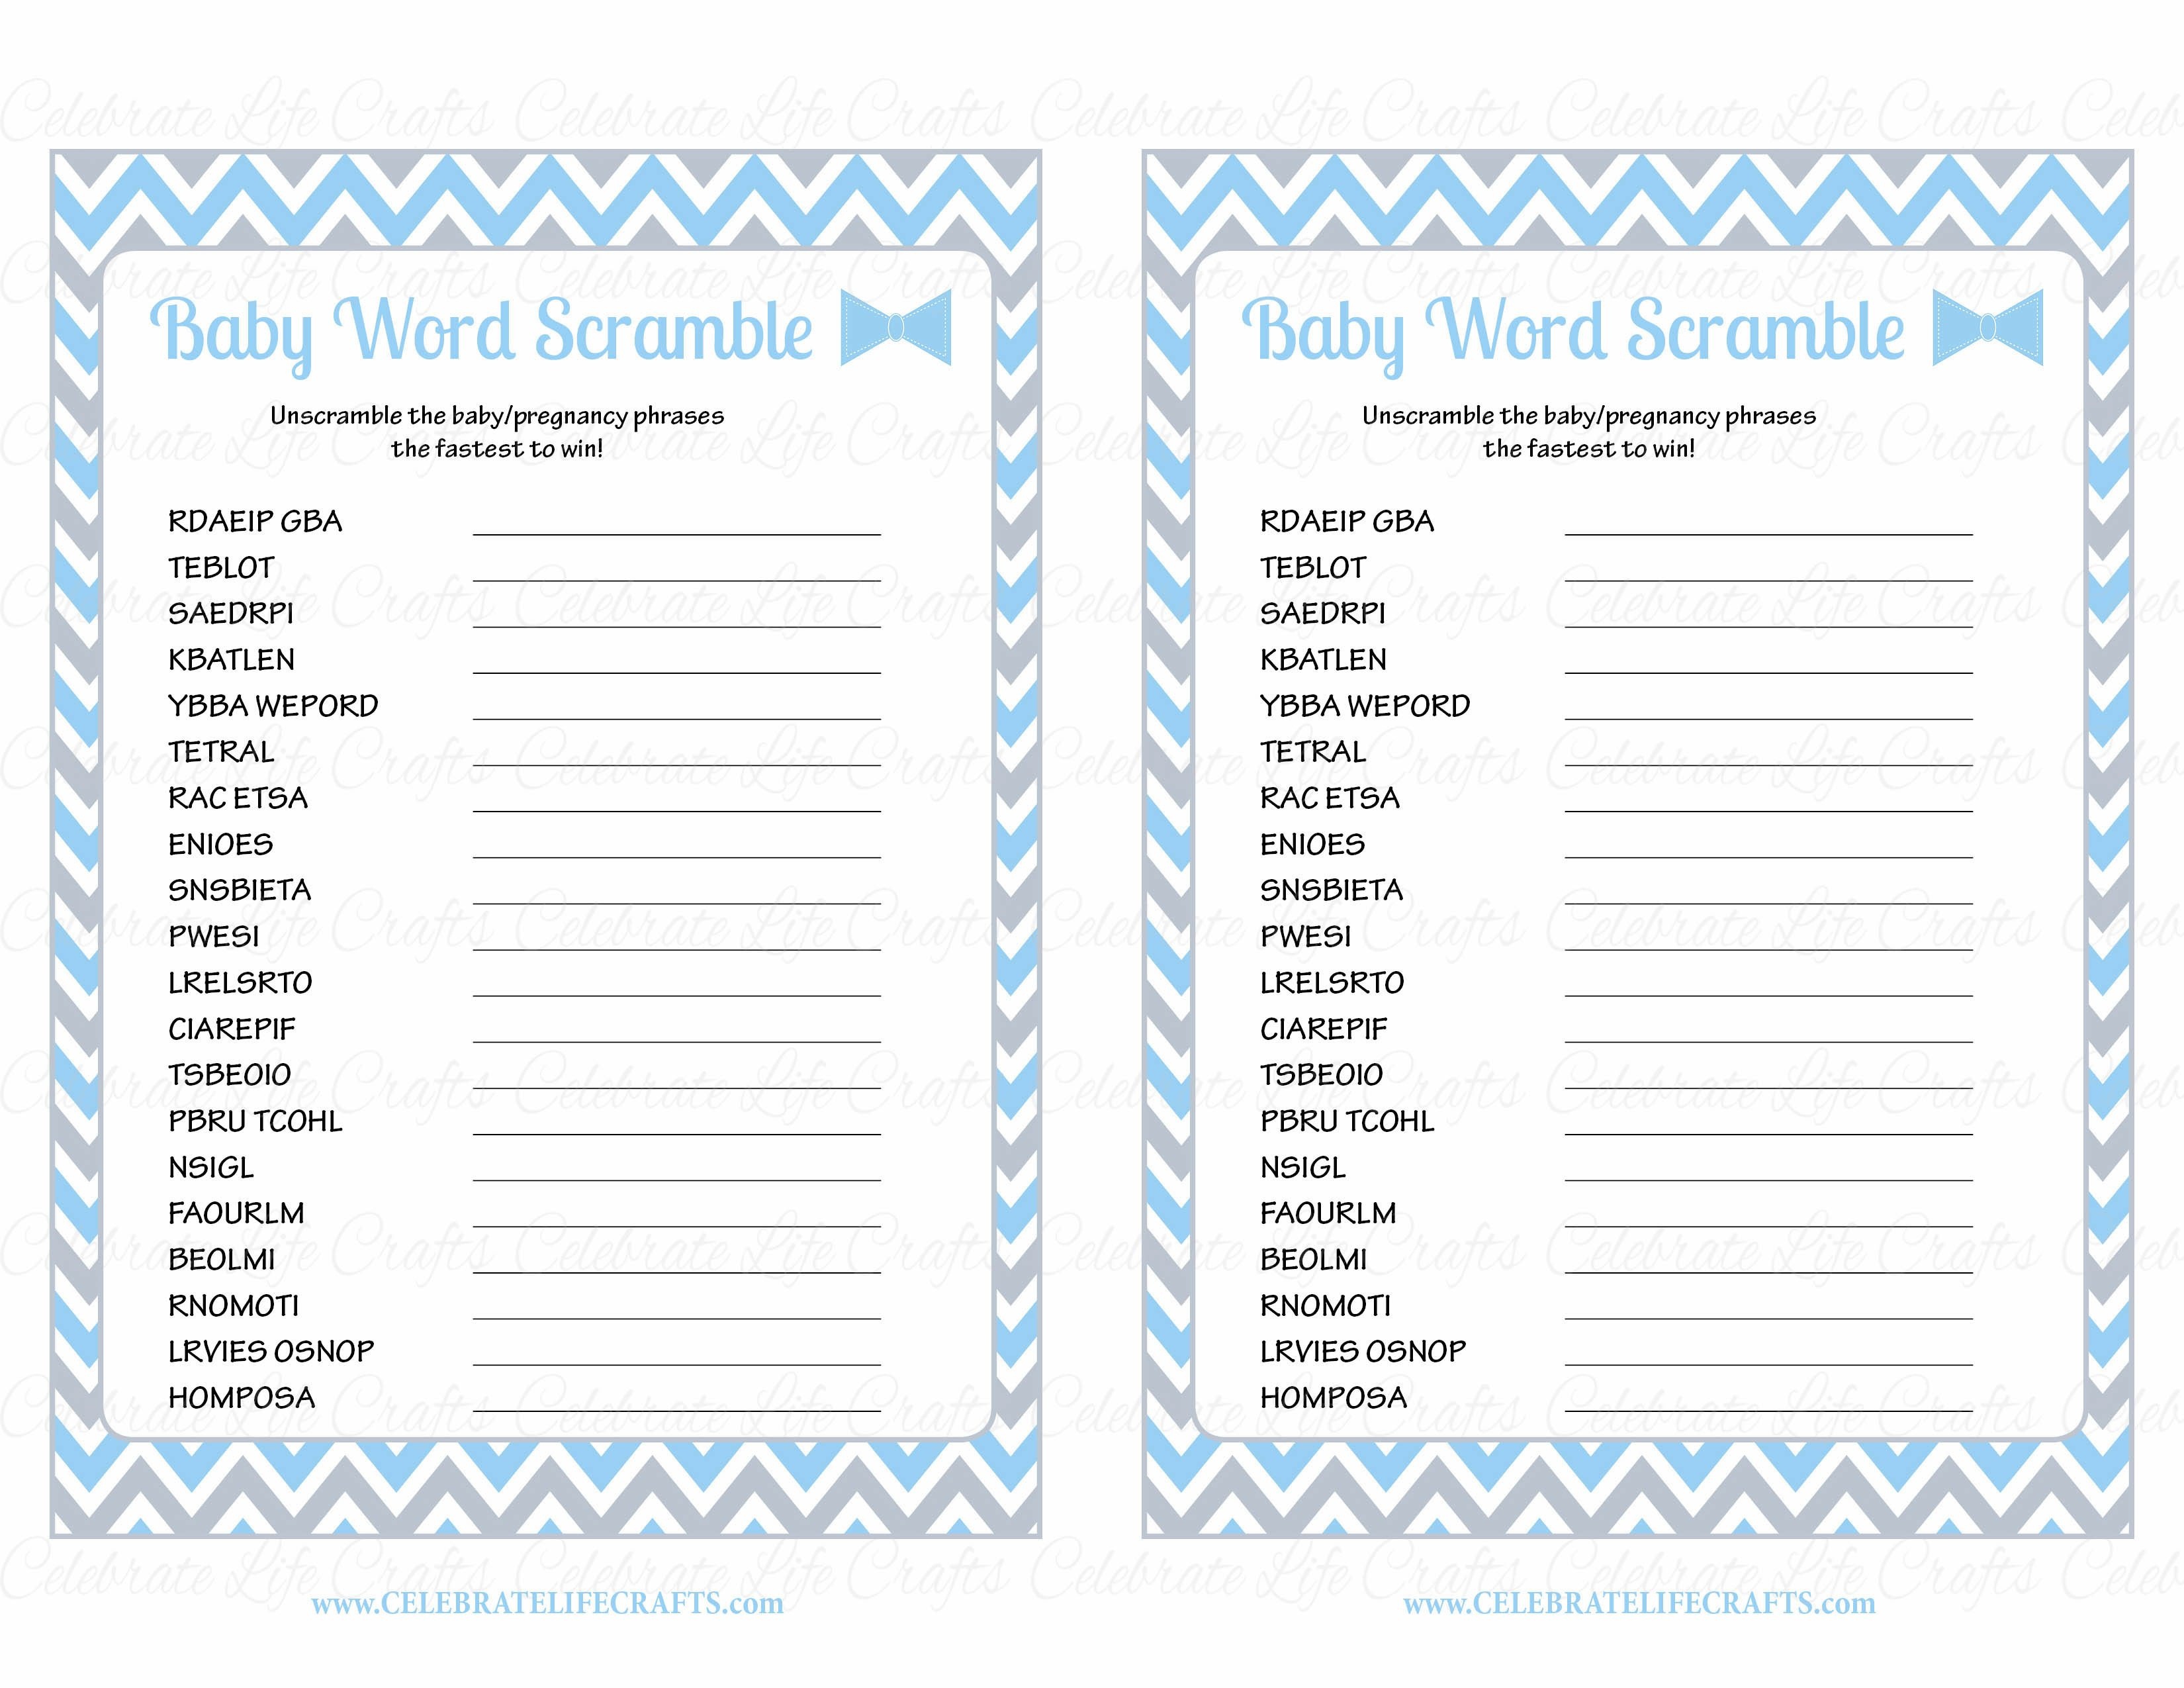 Perfect Ideas Baby Shower Games Baby Word Scramble Printable - Free Printable Baby Shower Games Word Scramble